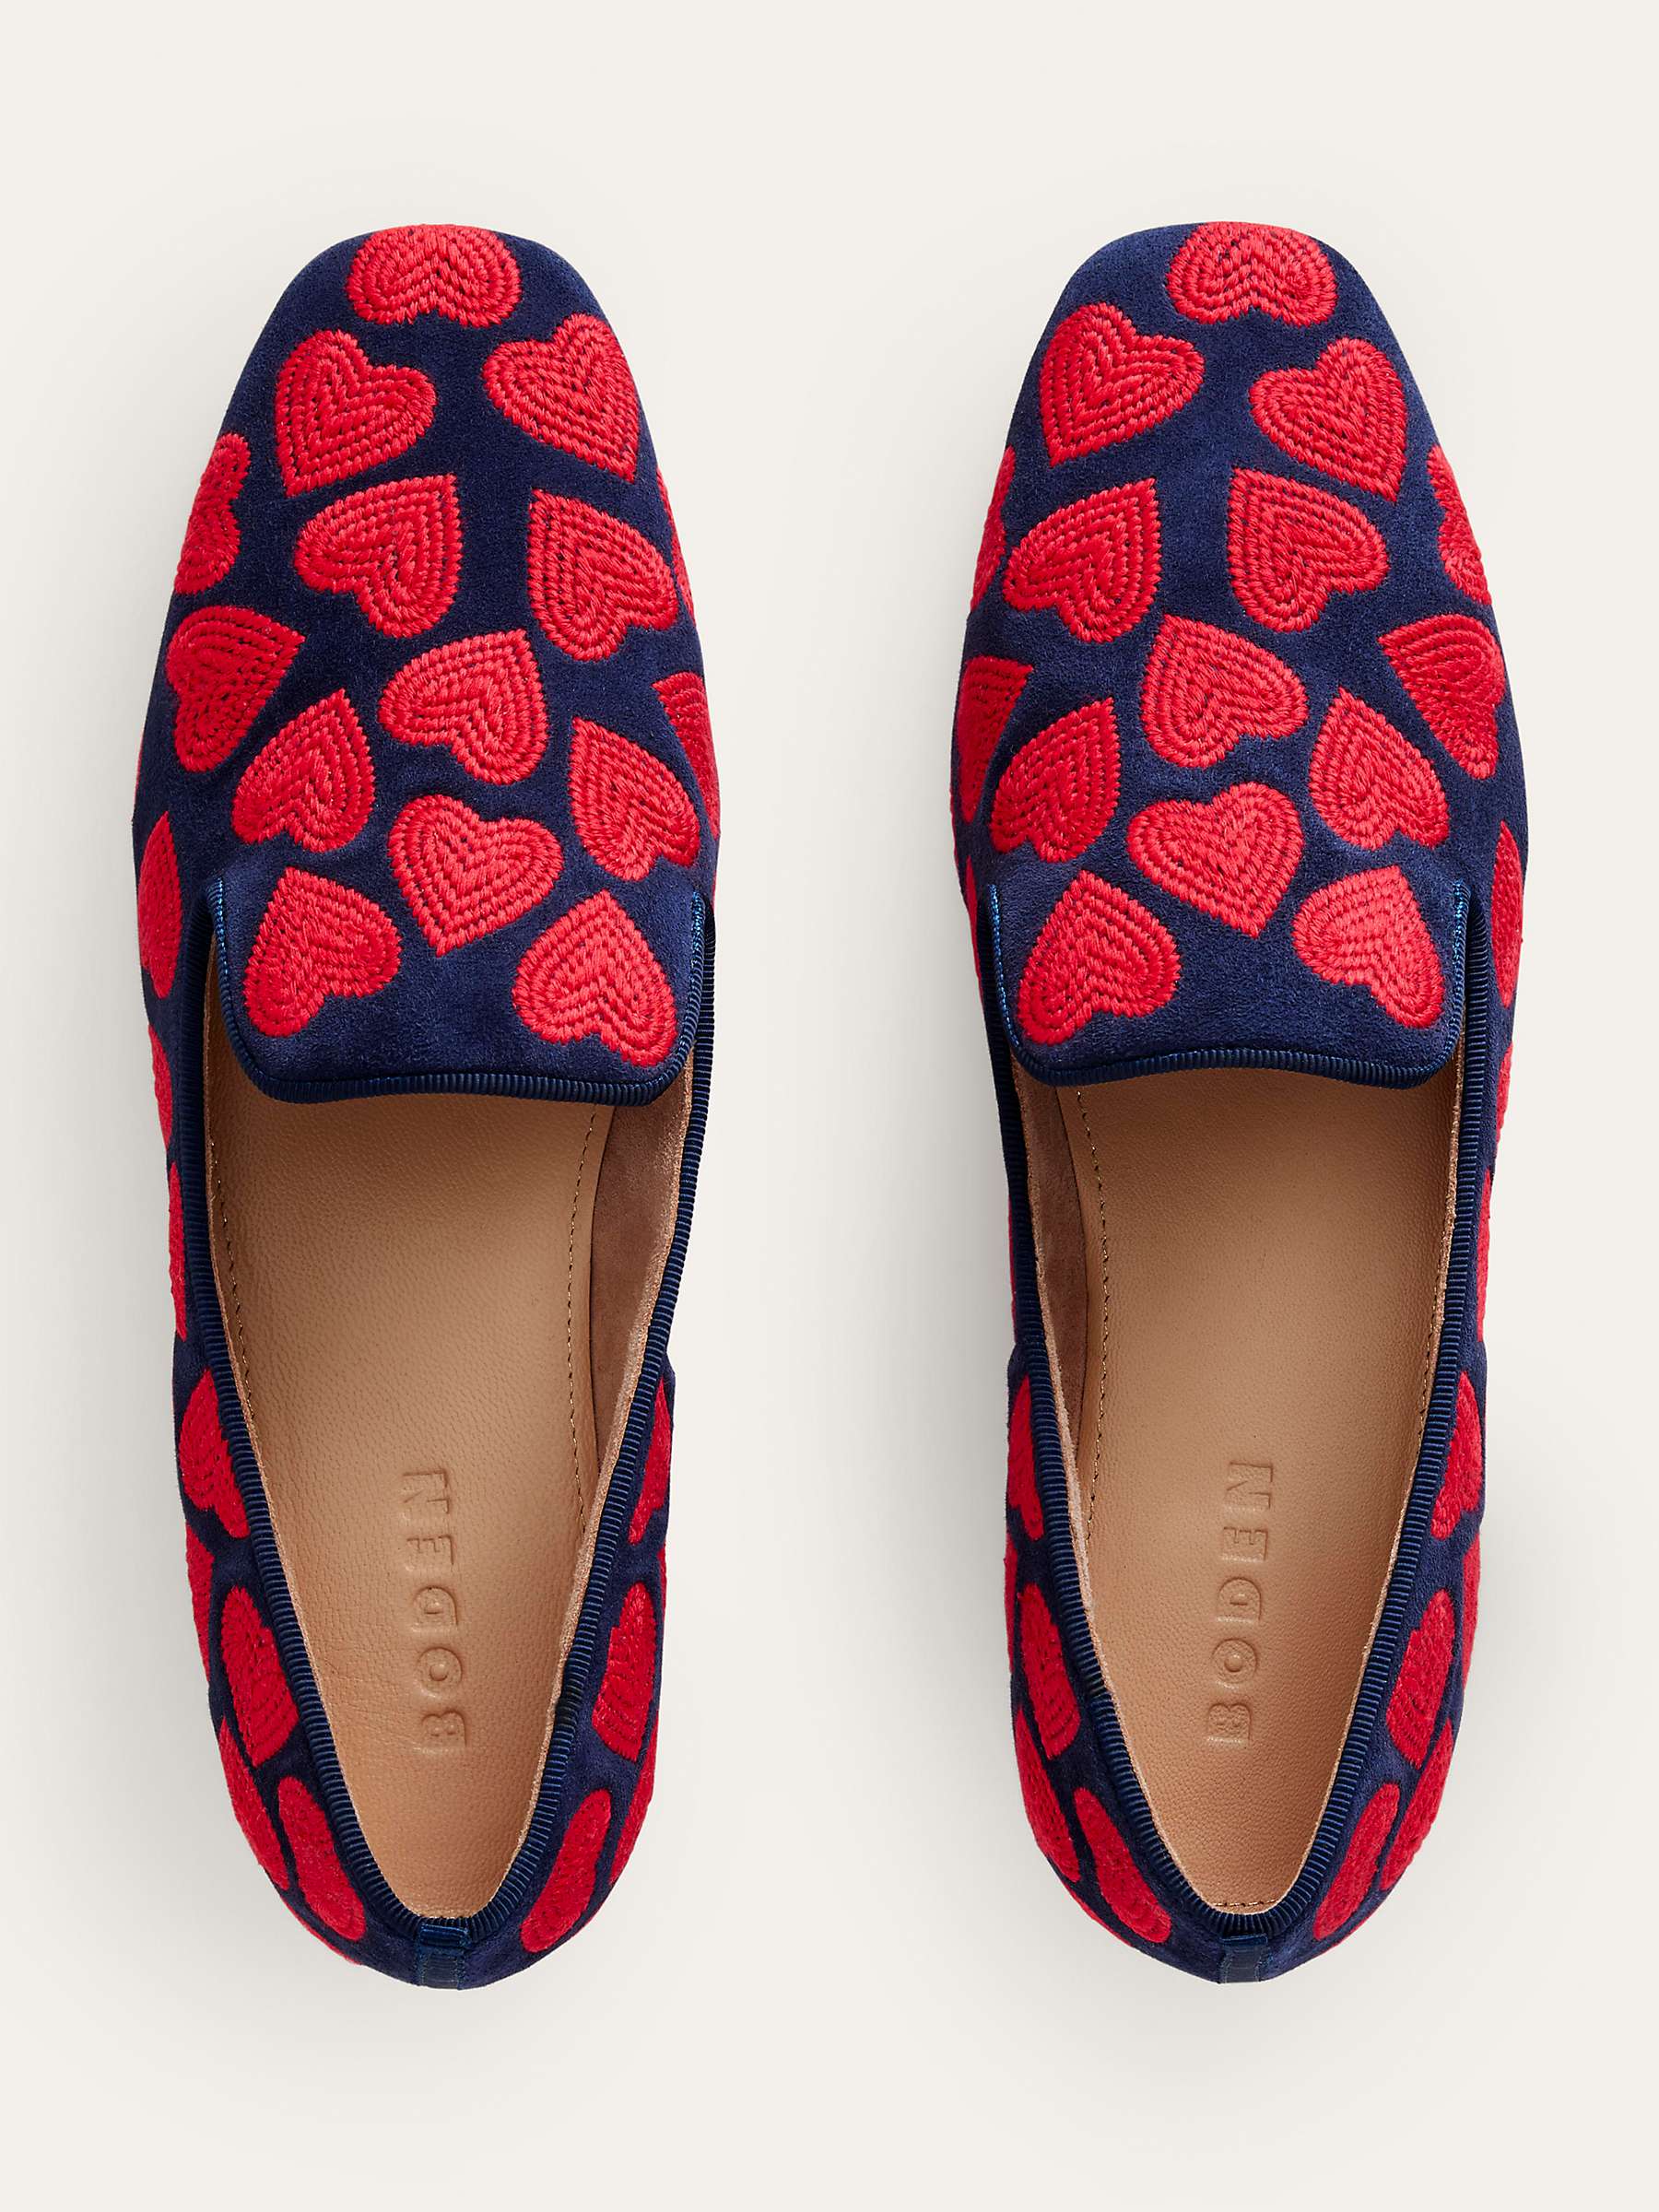 Buy Boden Heart Embroidered Slipper Cut Loafers, Navy/Red Online at johnlewis.com